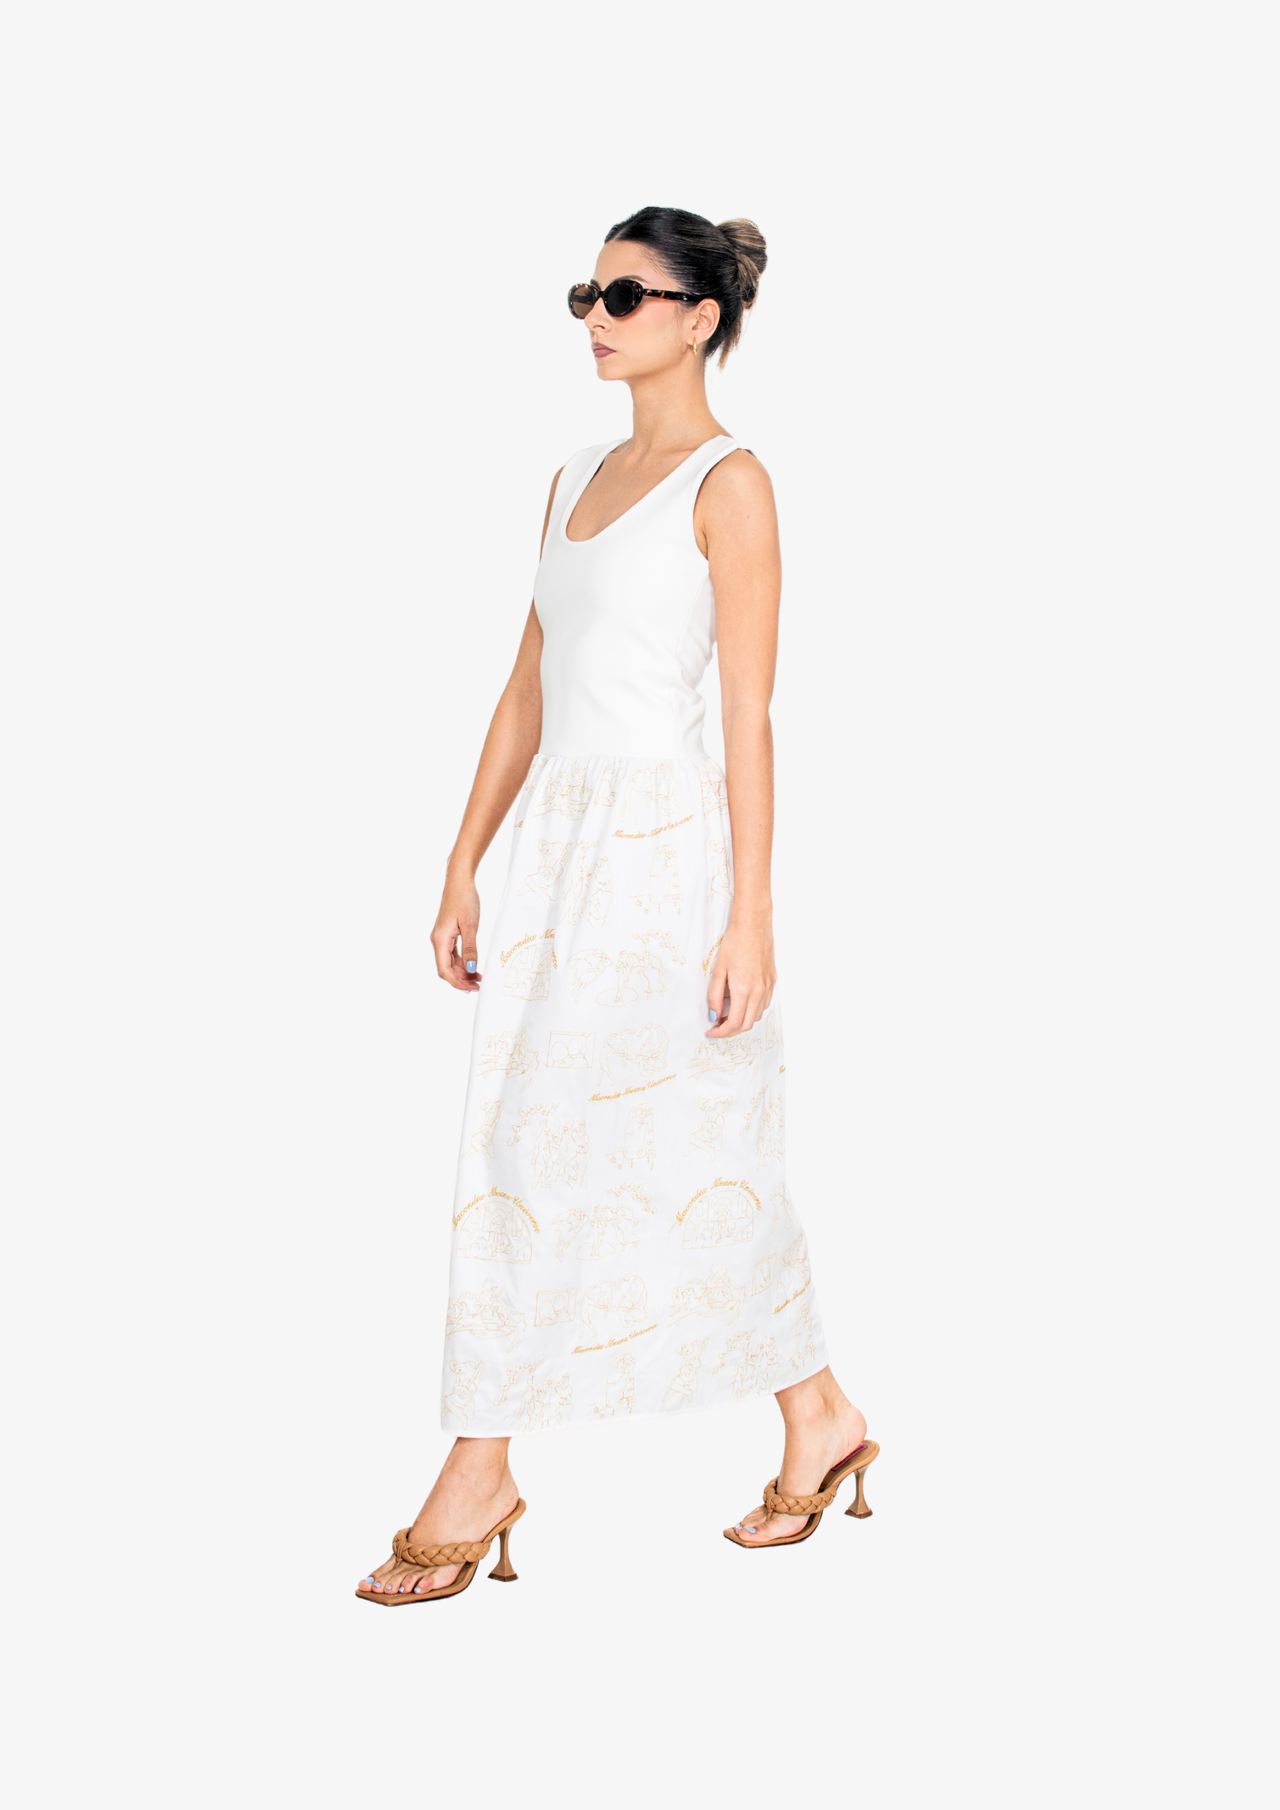 Embroided Midi Dress in White